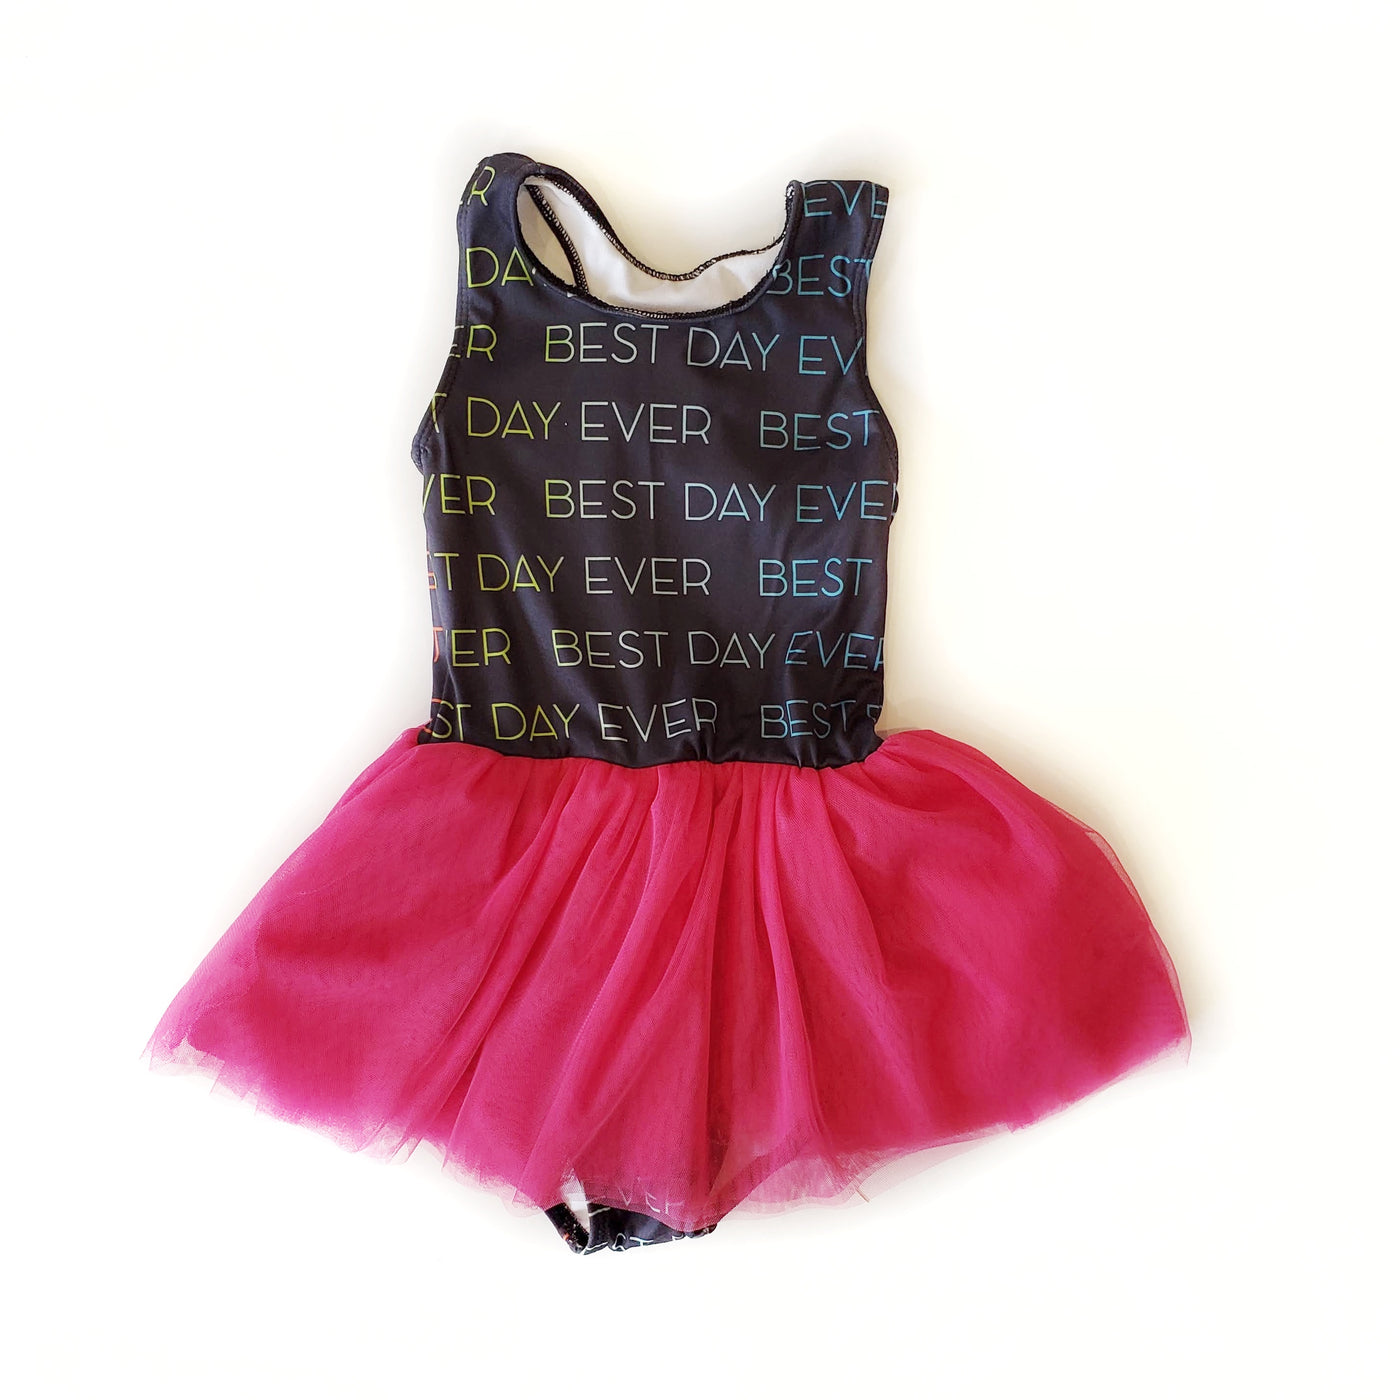 Pocket tutude - Personalized Tutude - Scratch Off Ombre